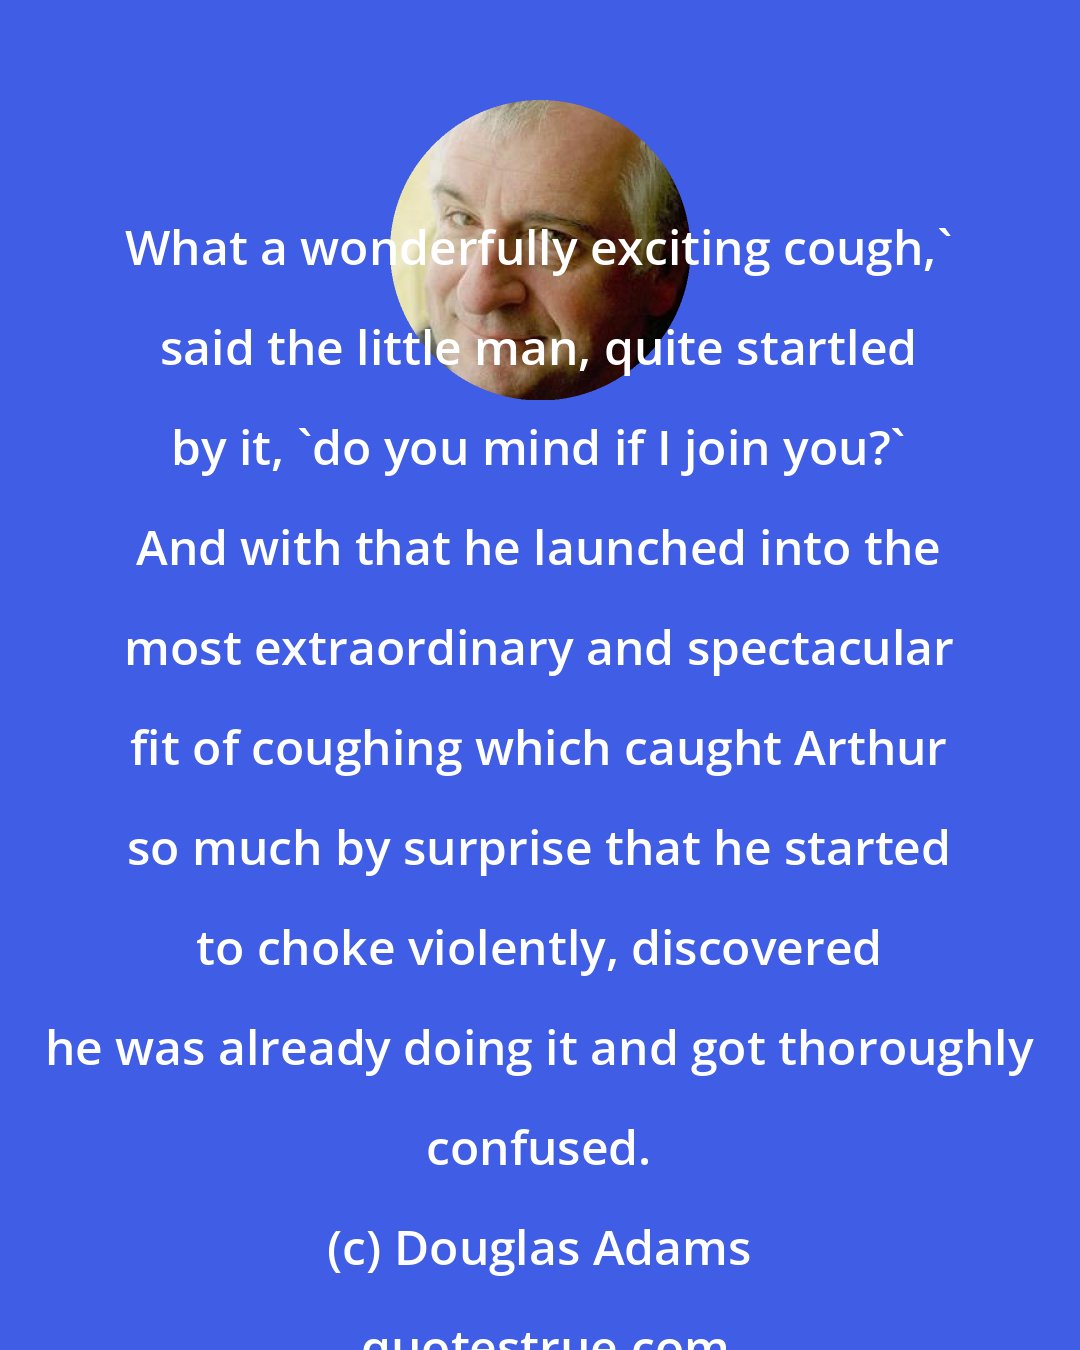 Douglas Adams: What a wonderfully exciting cough,' said the little man, quite startled by it, 'do you mind if I join you?' And with that he launched into the most extraordinary and spectacular fit of coughing which caught Arthur so much by surprise that he started to choke violently, discovered he was already doing it and got thoroughly confused.